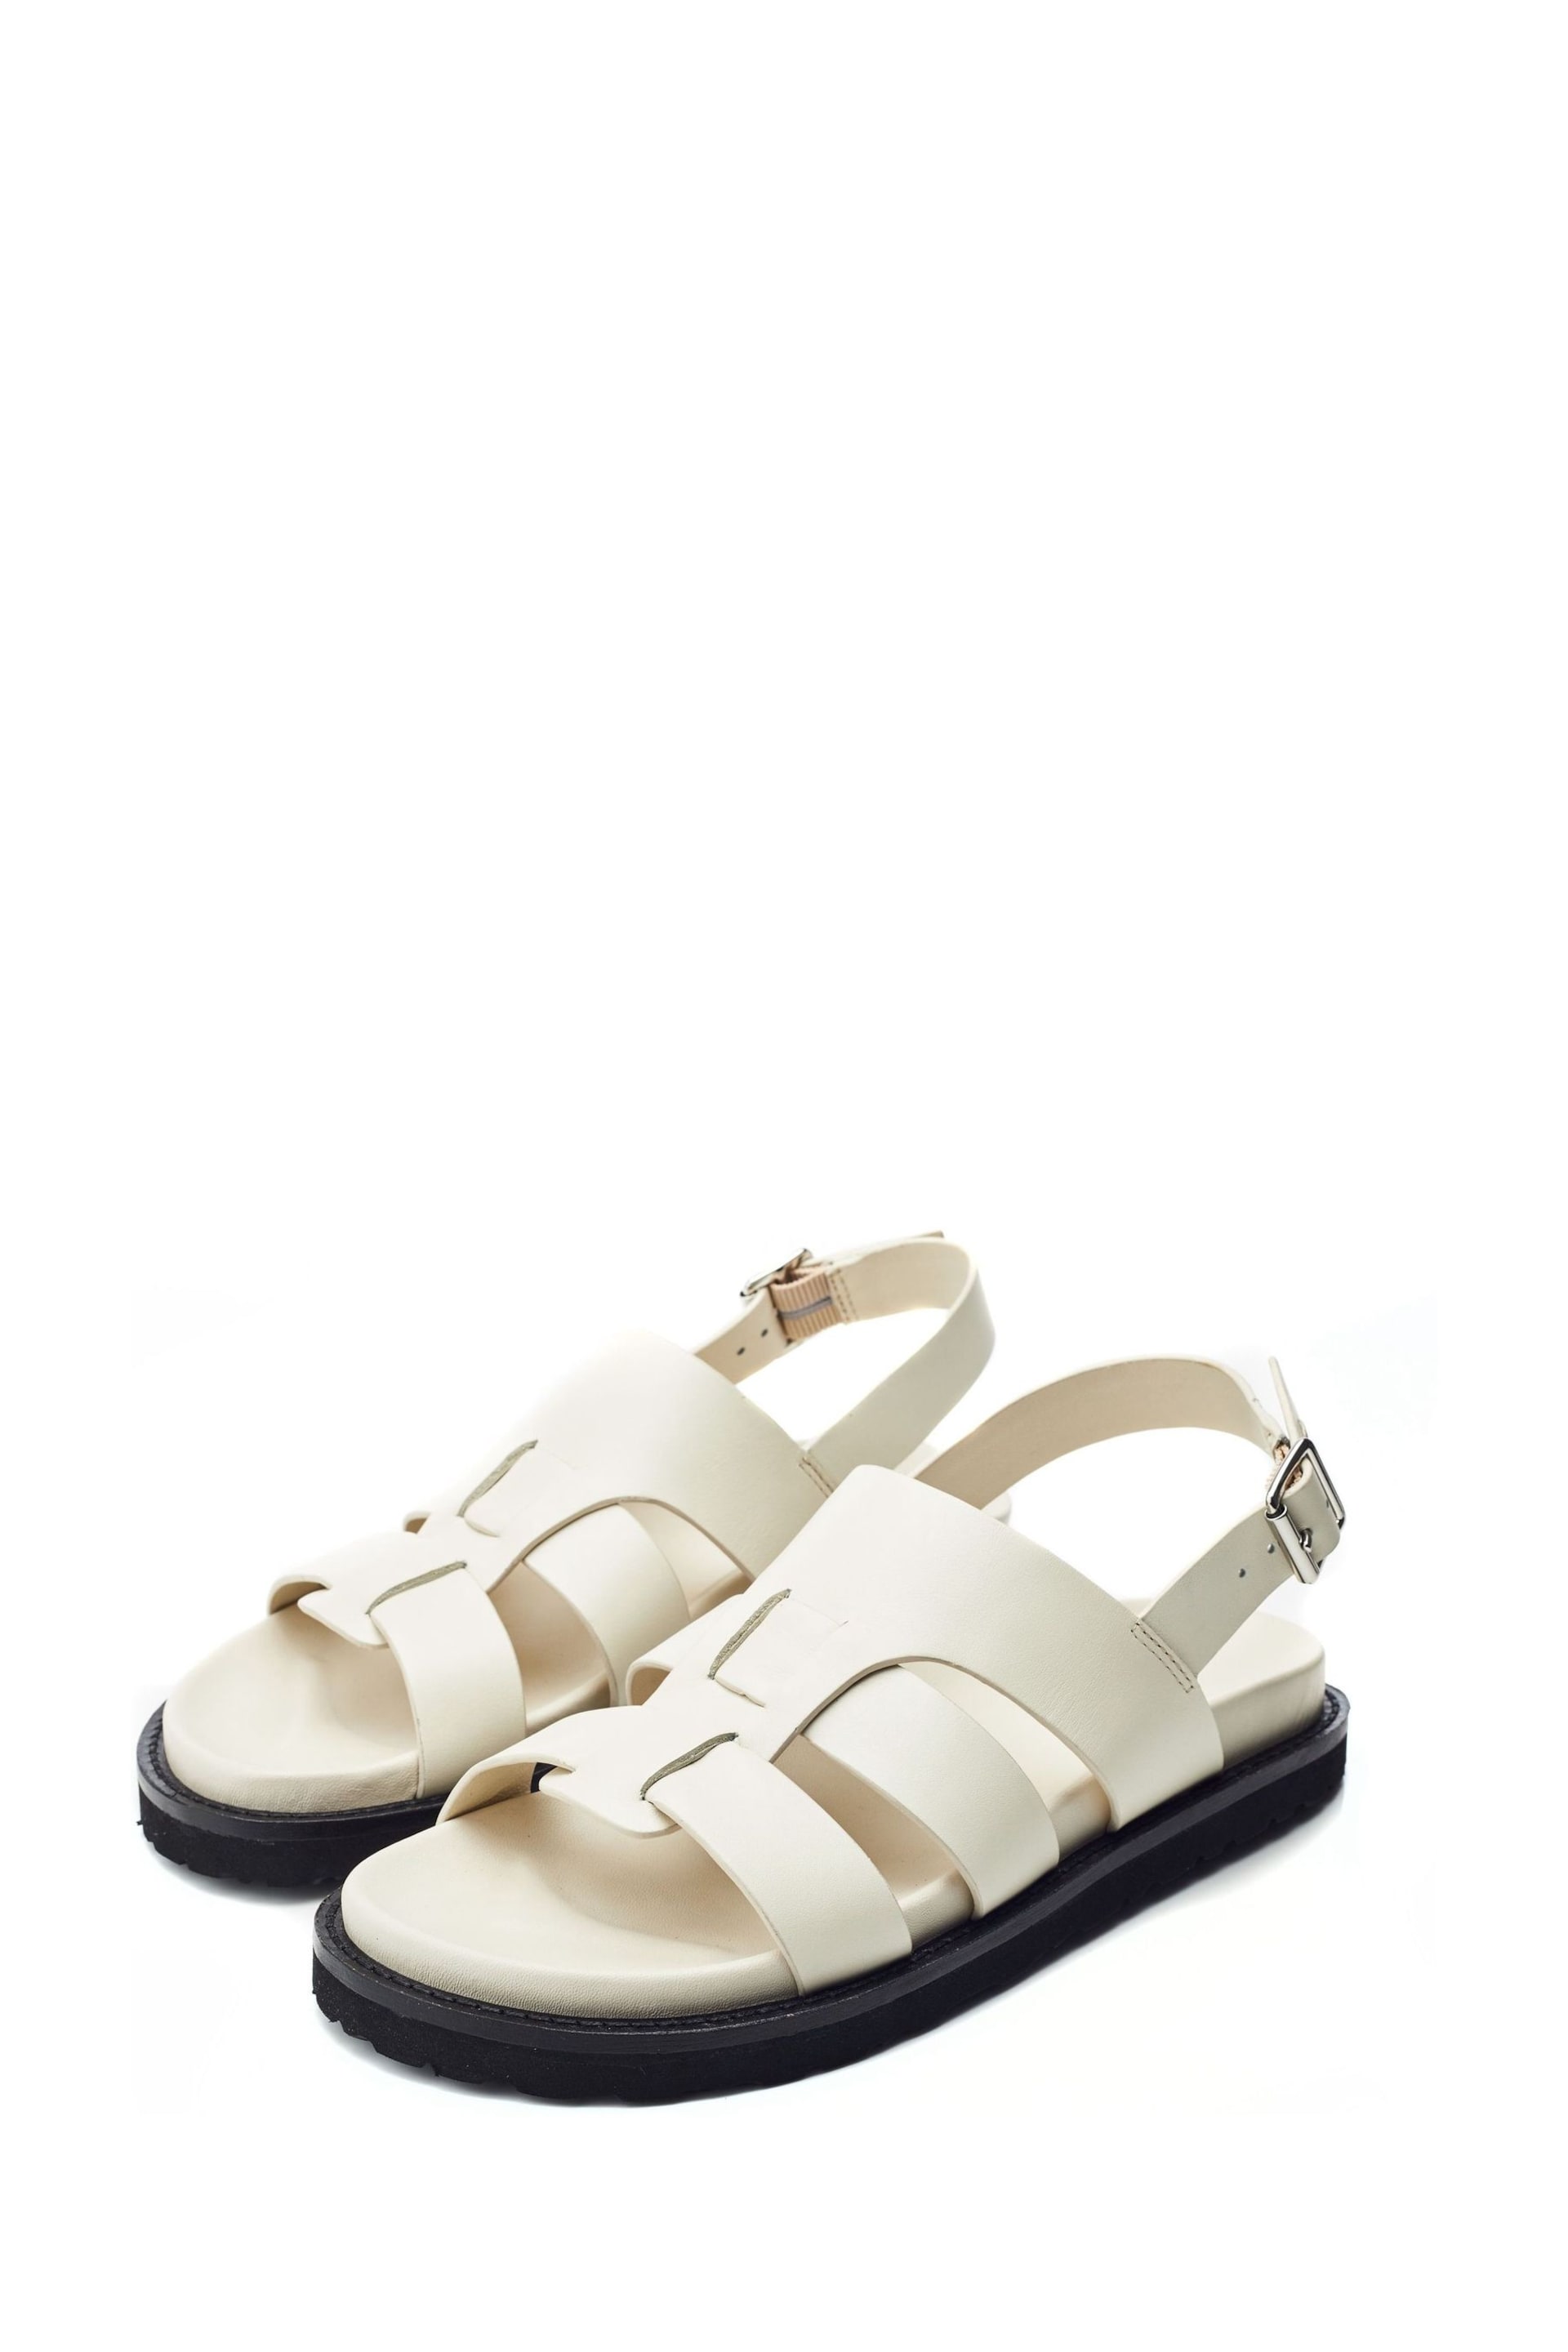 Moda in Pelle SH Lonnie Sling Back T-Strap Sandals - Image 2 of 4